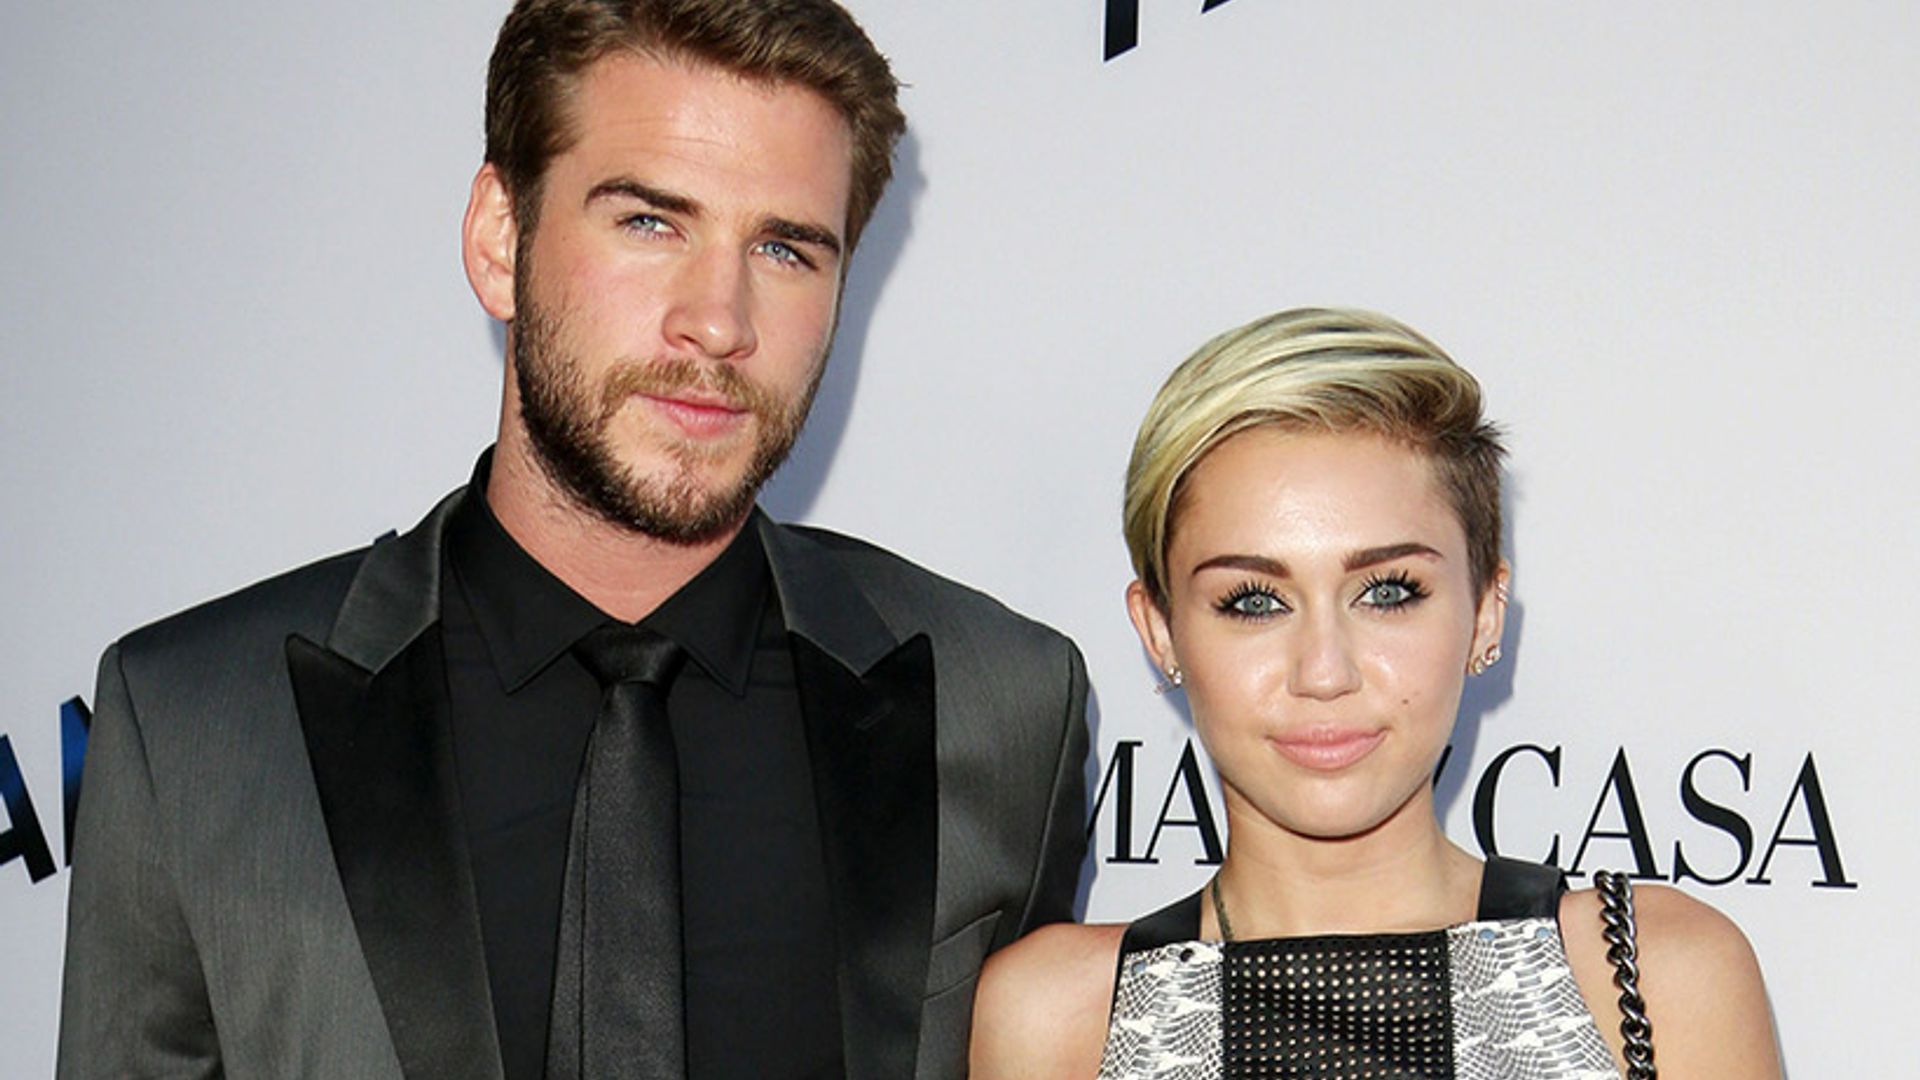 The couple who sing together stay together - Watch Miley Cyrus and Liam Hemsworth sing along to Justin Bieber's 'Love Yourself'